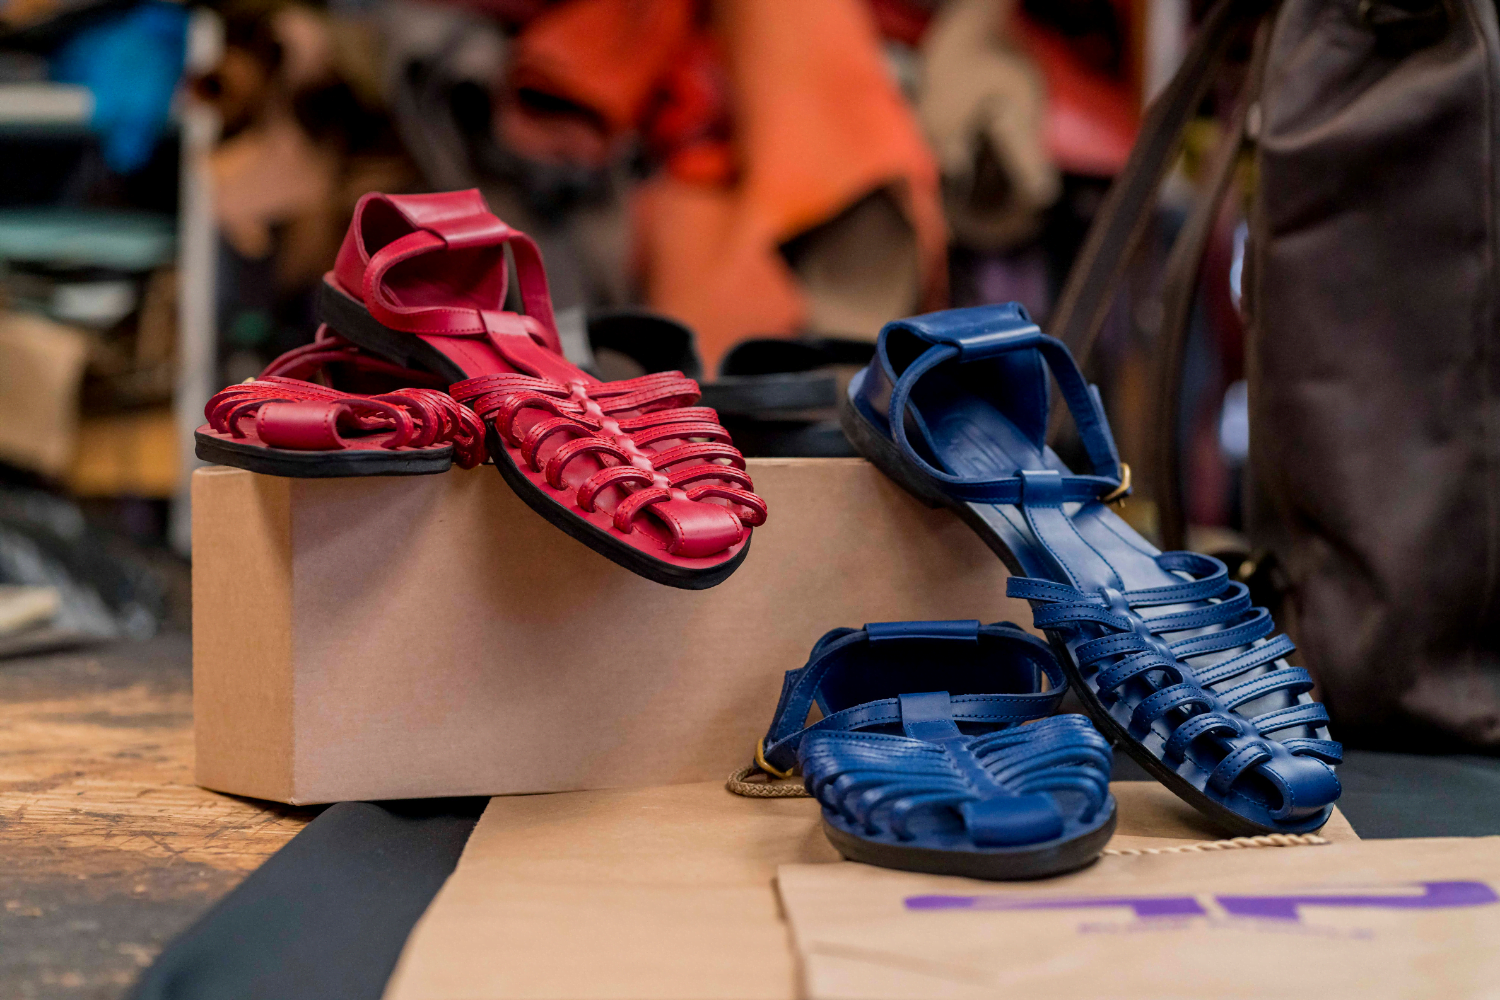 A pair of red leather sandals rests on a box next to a pair of blue sandals.